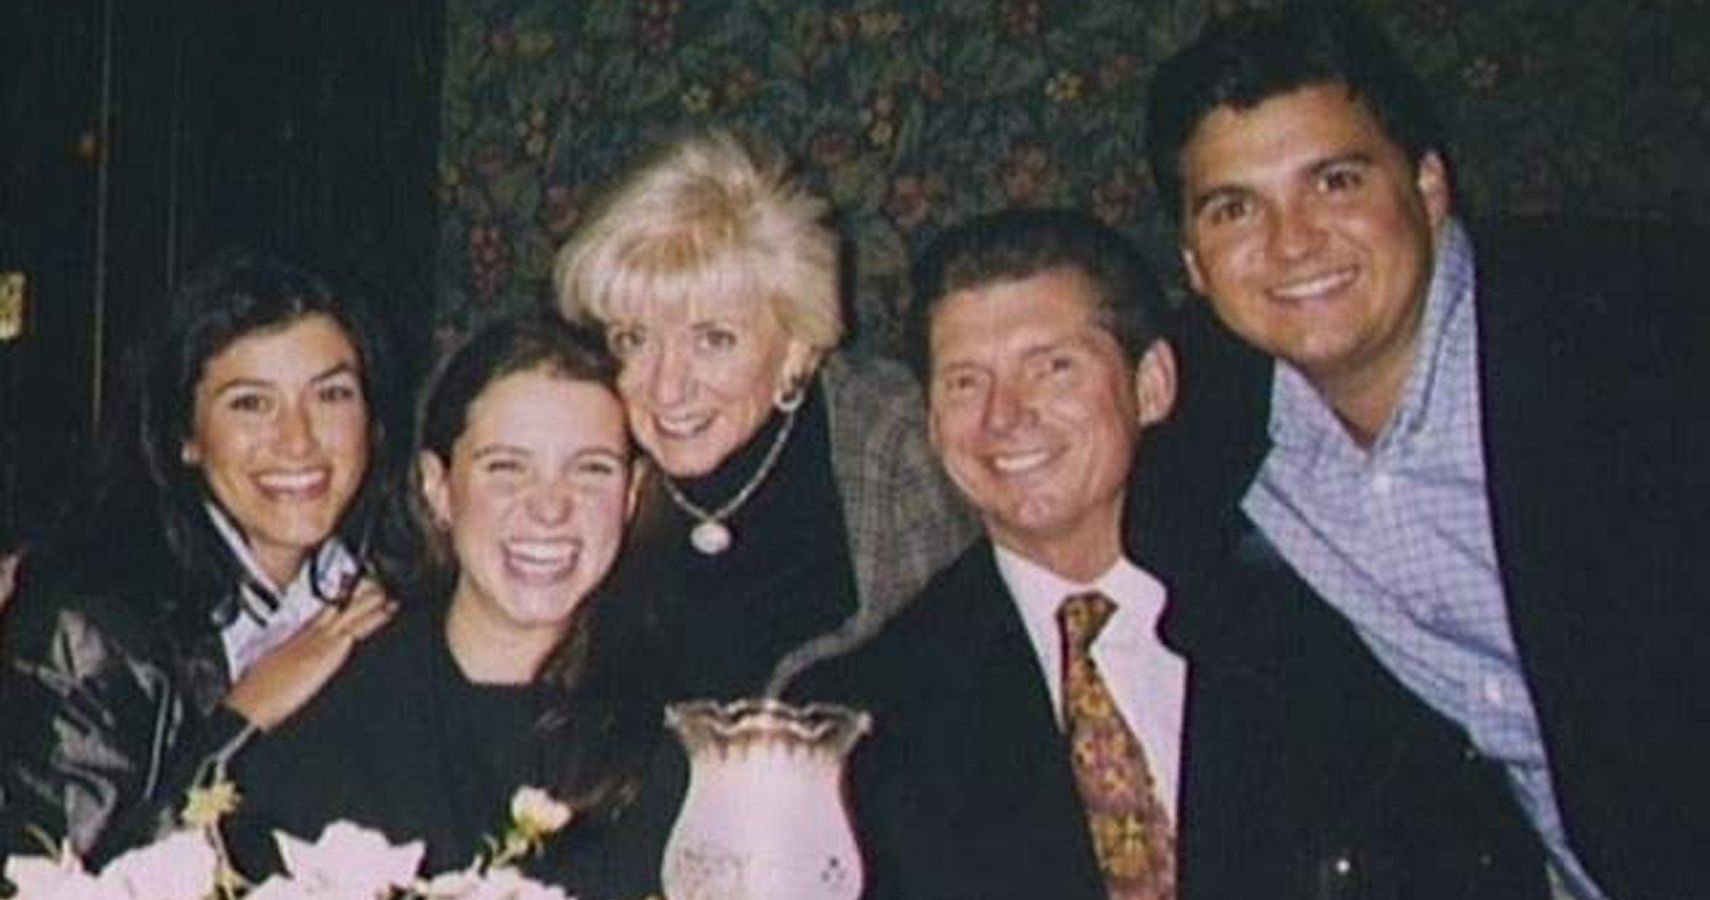 20 Rare Pics Of Shane McMahon And His Family Few People Have Seen